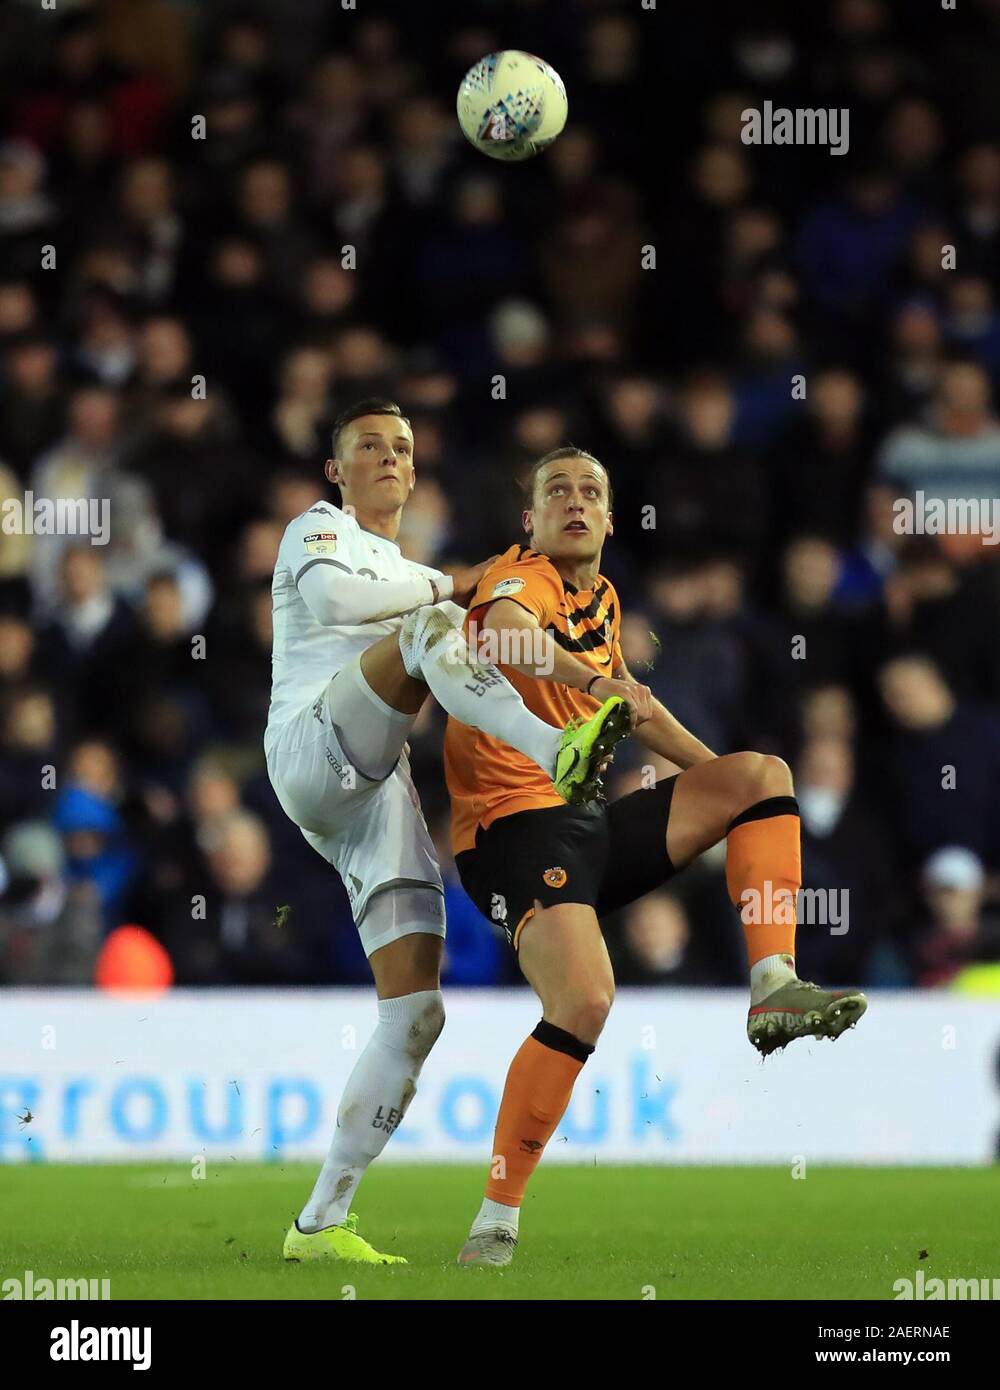 Leeds United's Ben White and Hull City's Tom Eaves battle for the ball during the Sky Bet Championship match at Elland Road, Leeds. Stock Photo